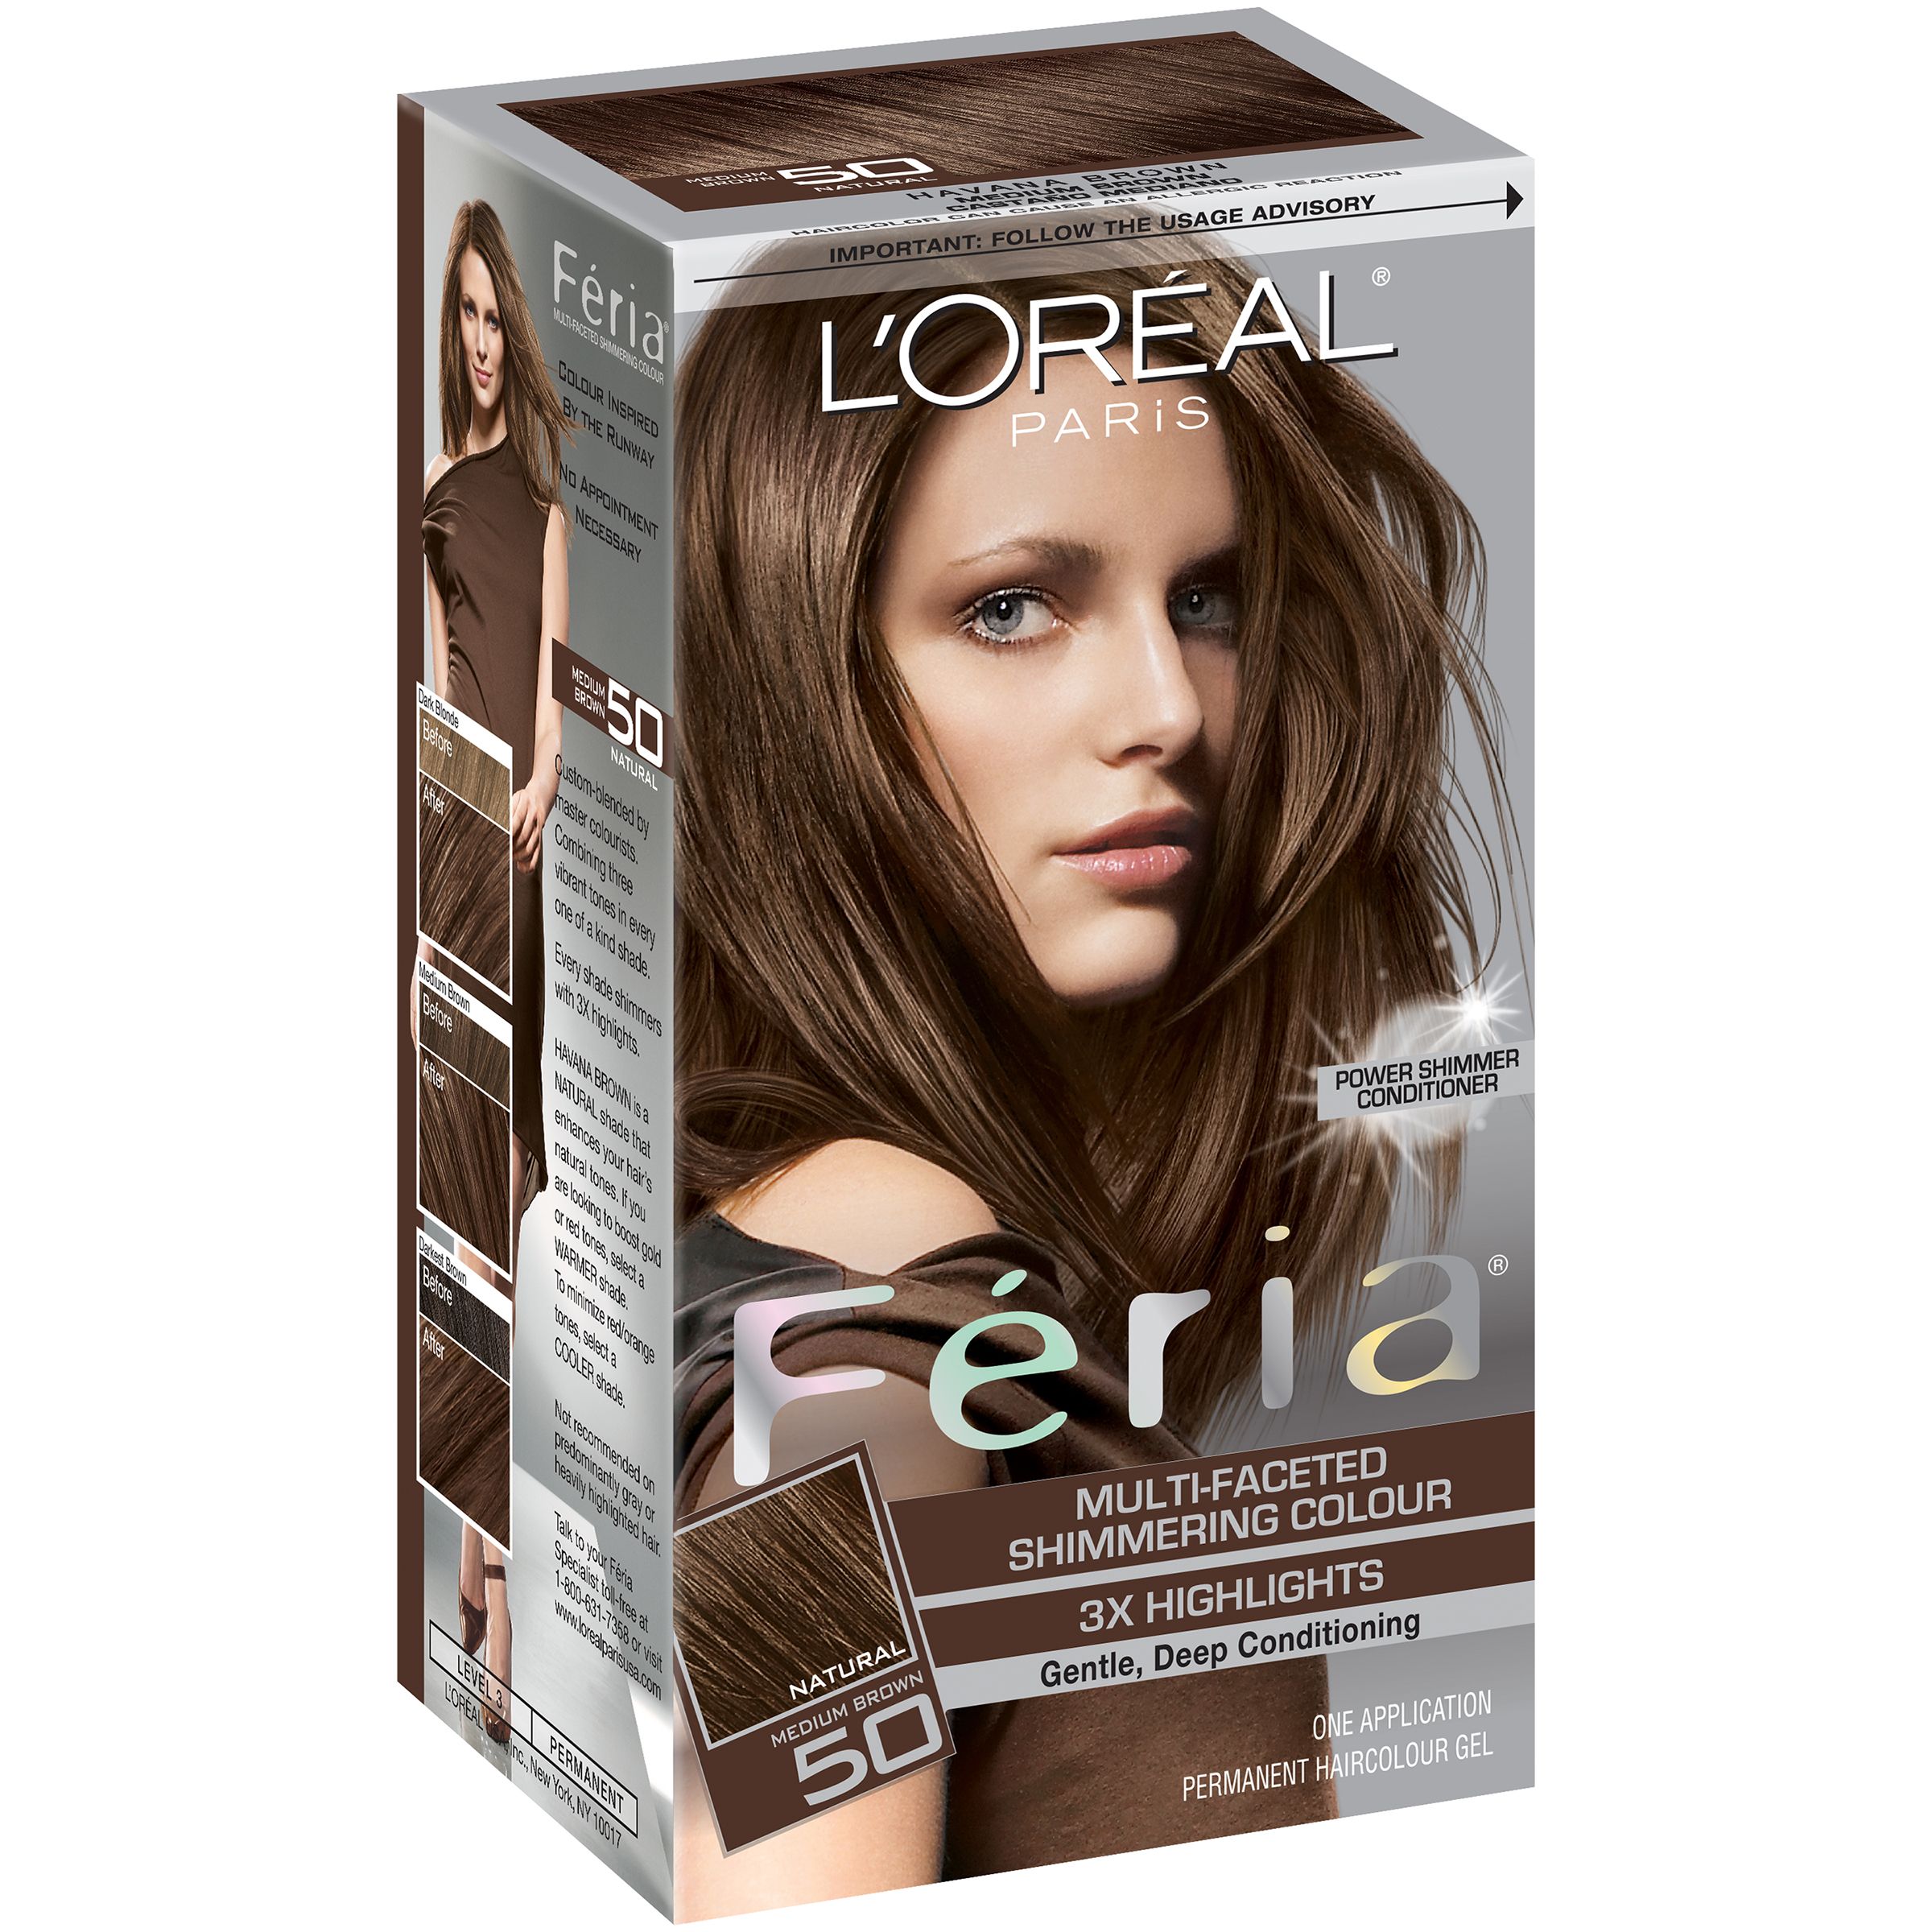 The 7 Best Box Hair Dyes To Buy In 2023 - Riset